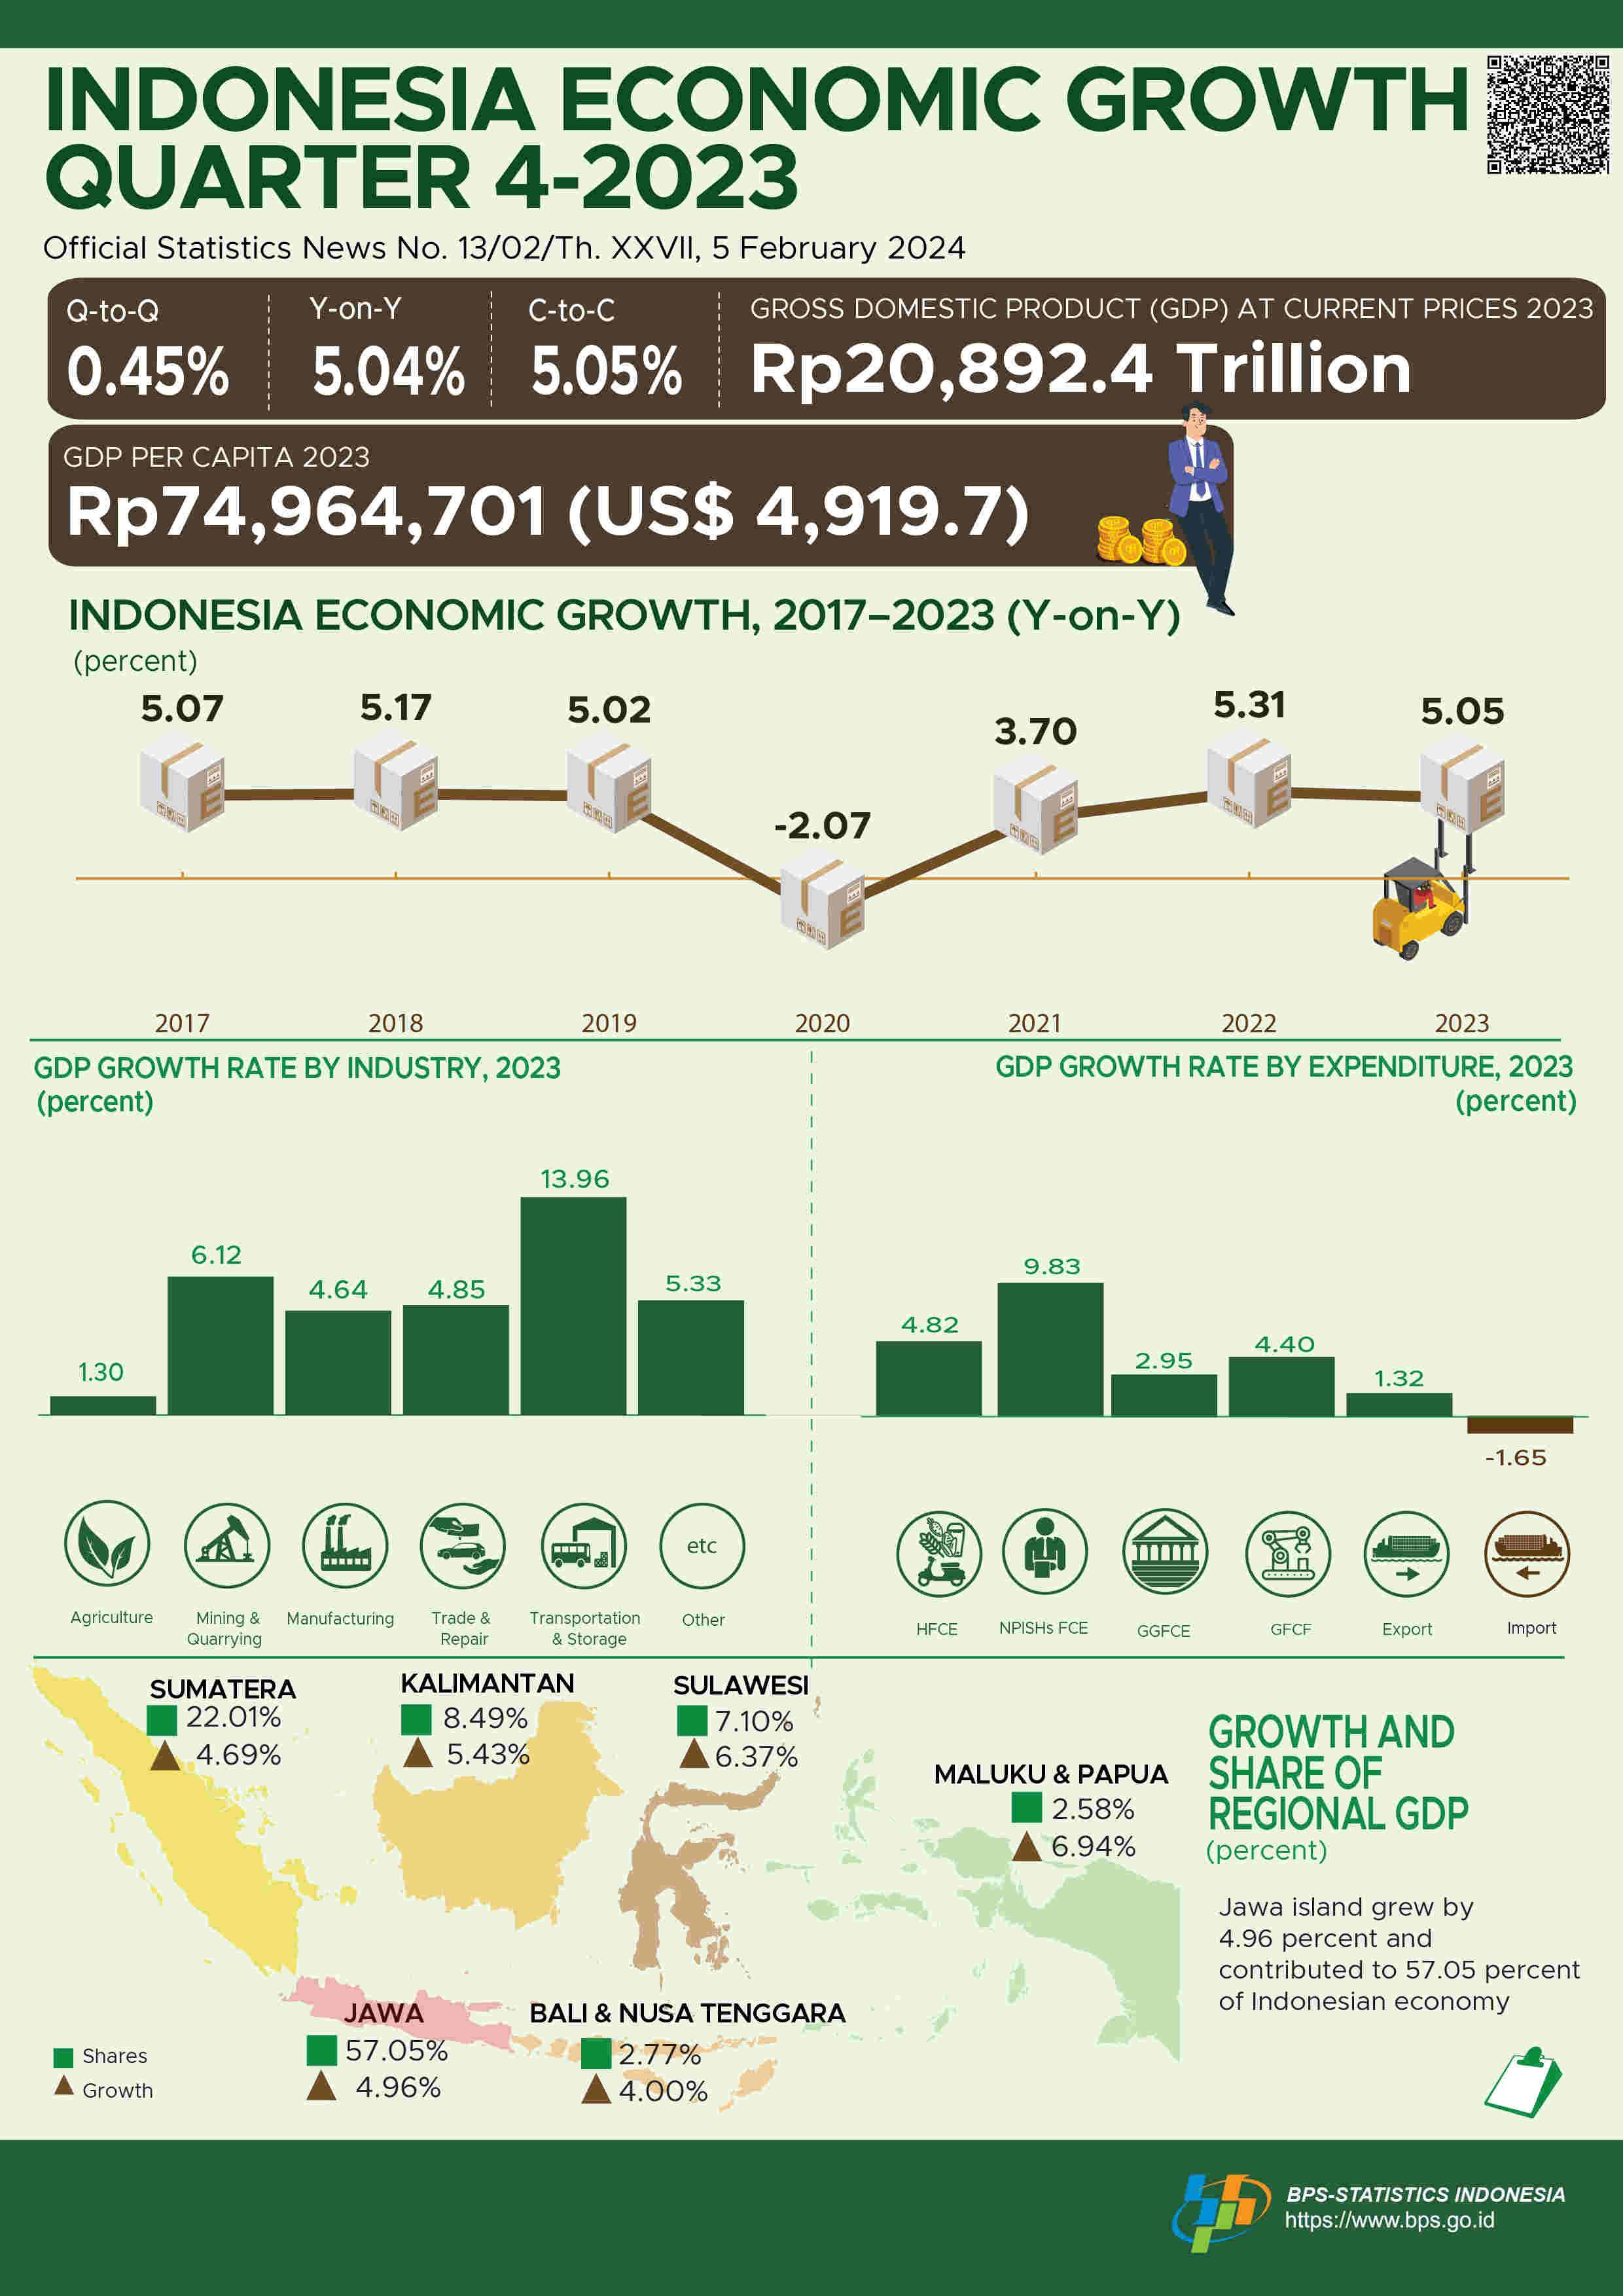 Indonesia’s GDP Growth Rate in Q4-2023 was 5.04 percent (y-on-y)